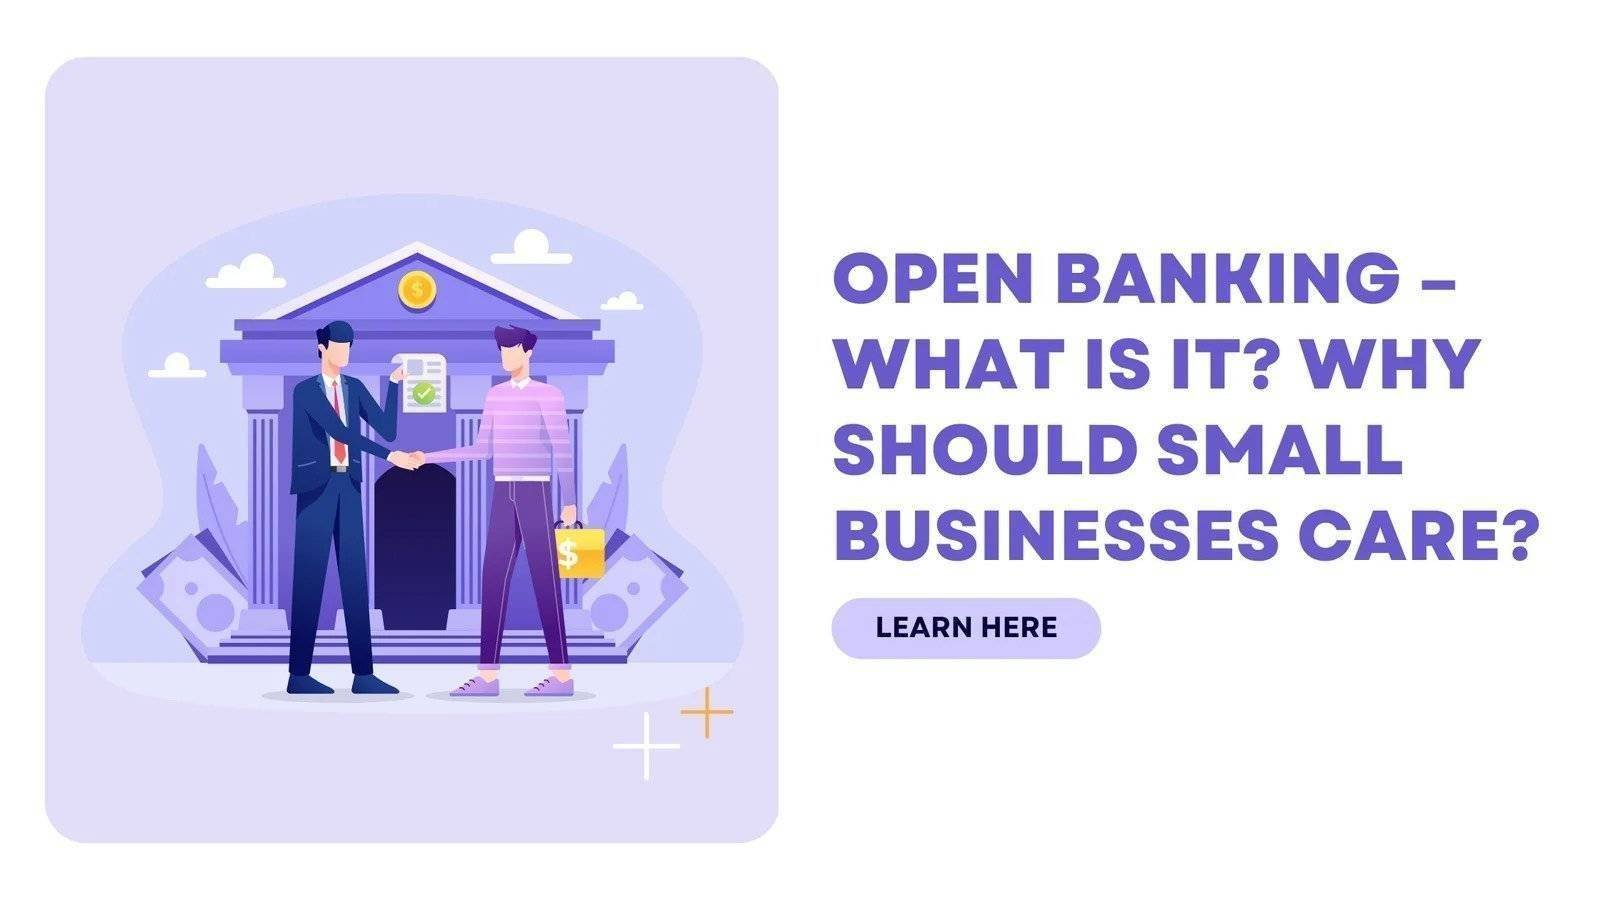 Open Banking – What Is It? Why Should Small Businesses Care?